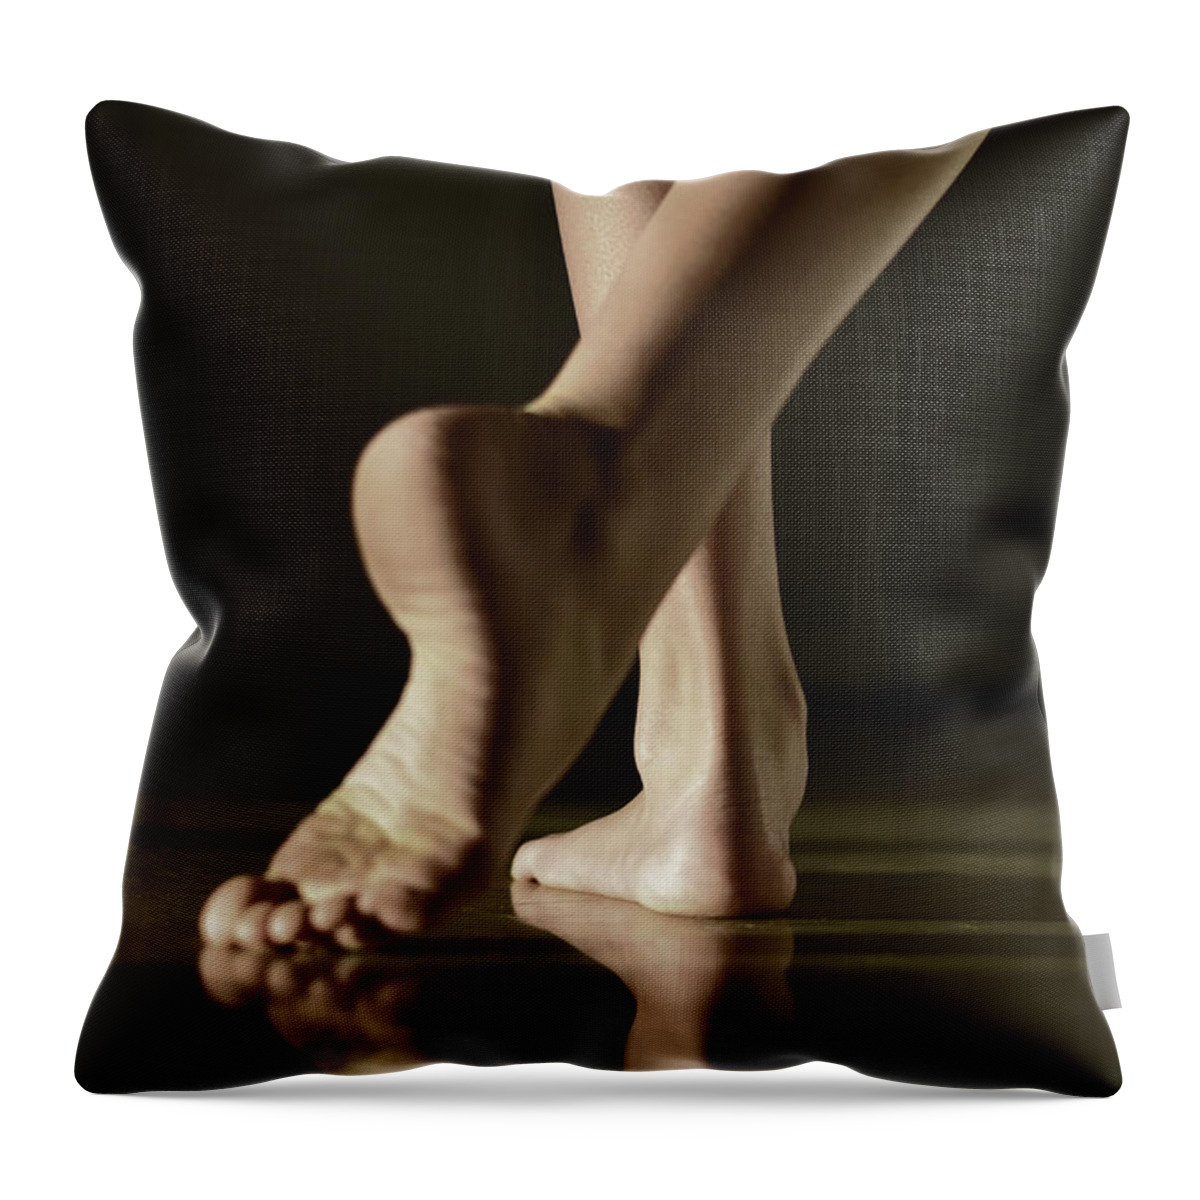 Dancer Art Throw Pillow featuring the photograph The Dance by Laura Fasulo